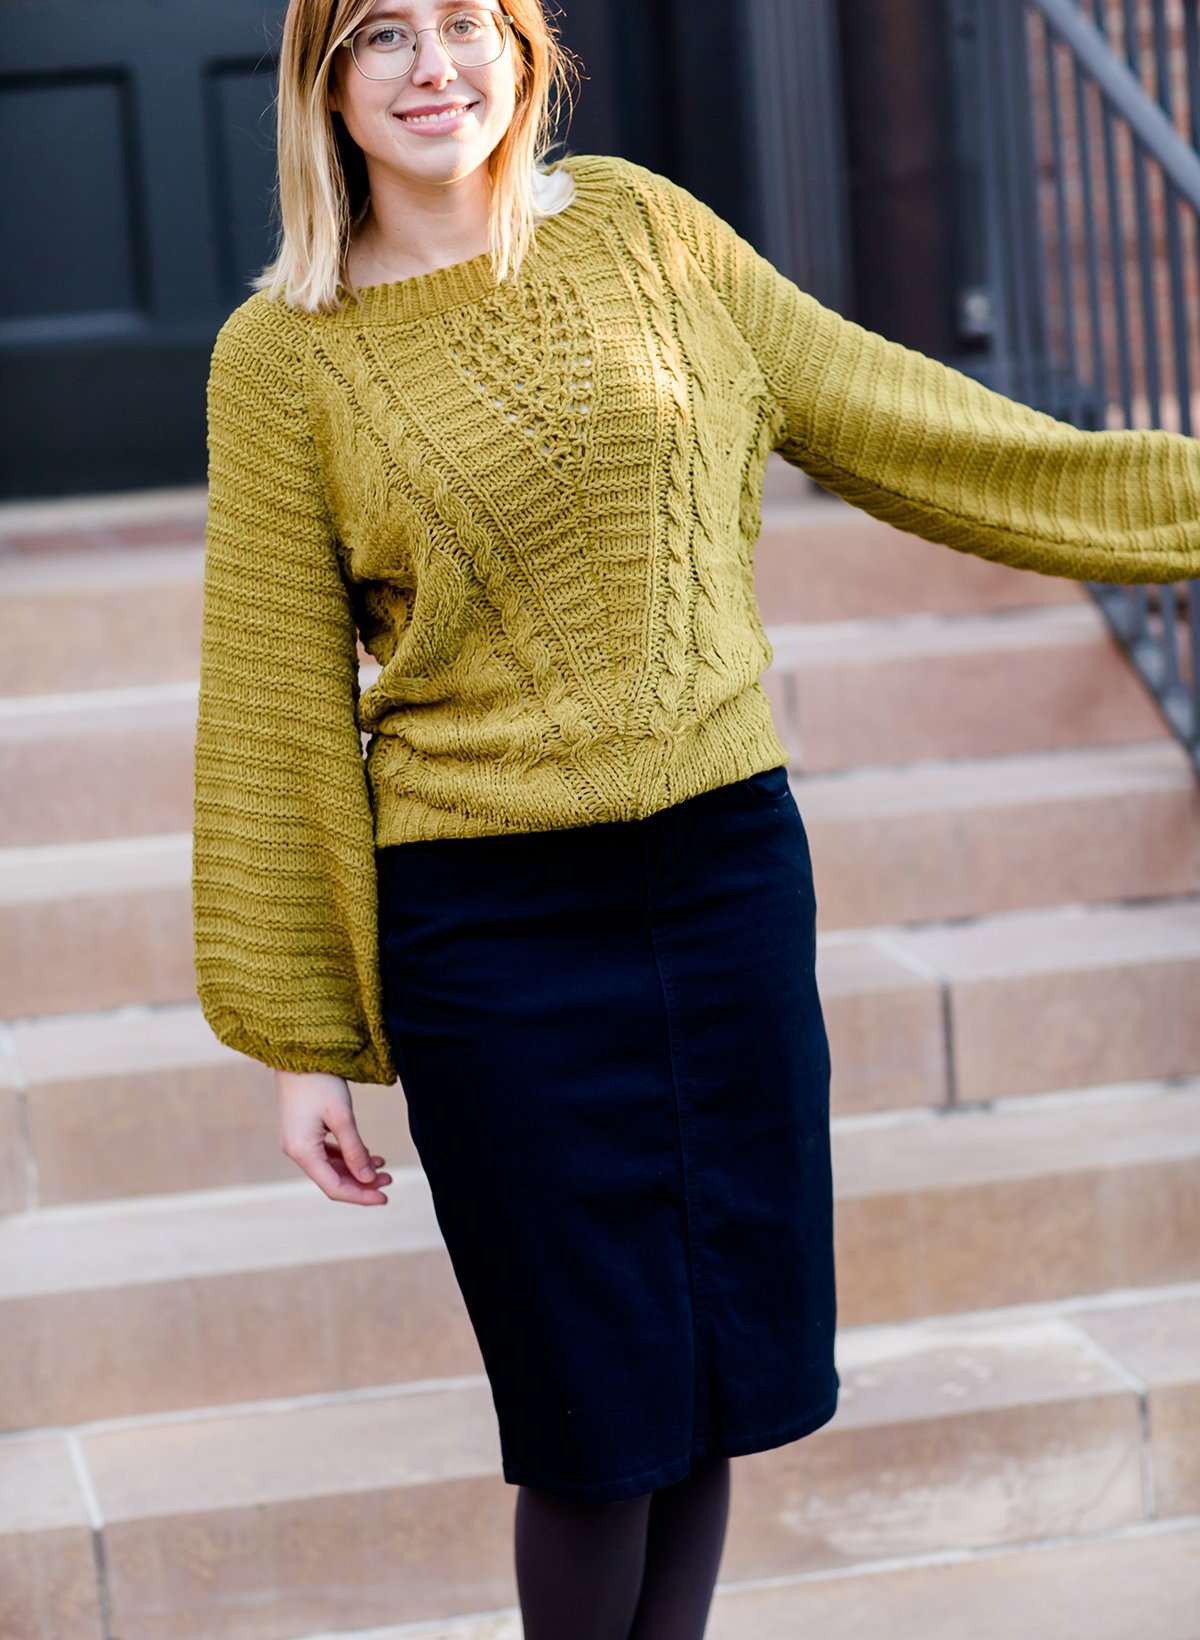 Young woman wearing a balloon sleeve chenille like sweater with a below the knee navy midi skirt